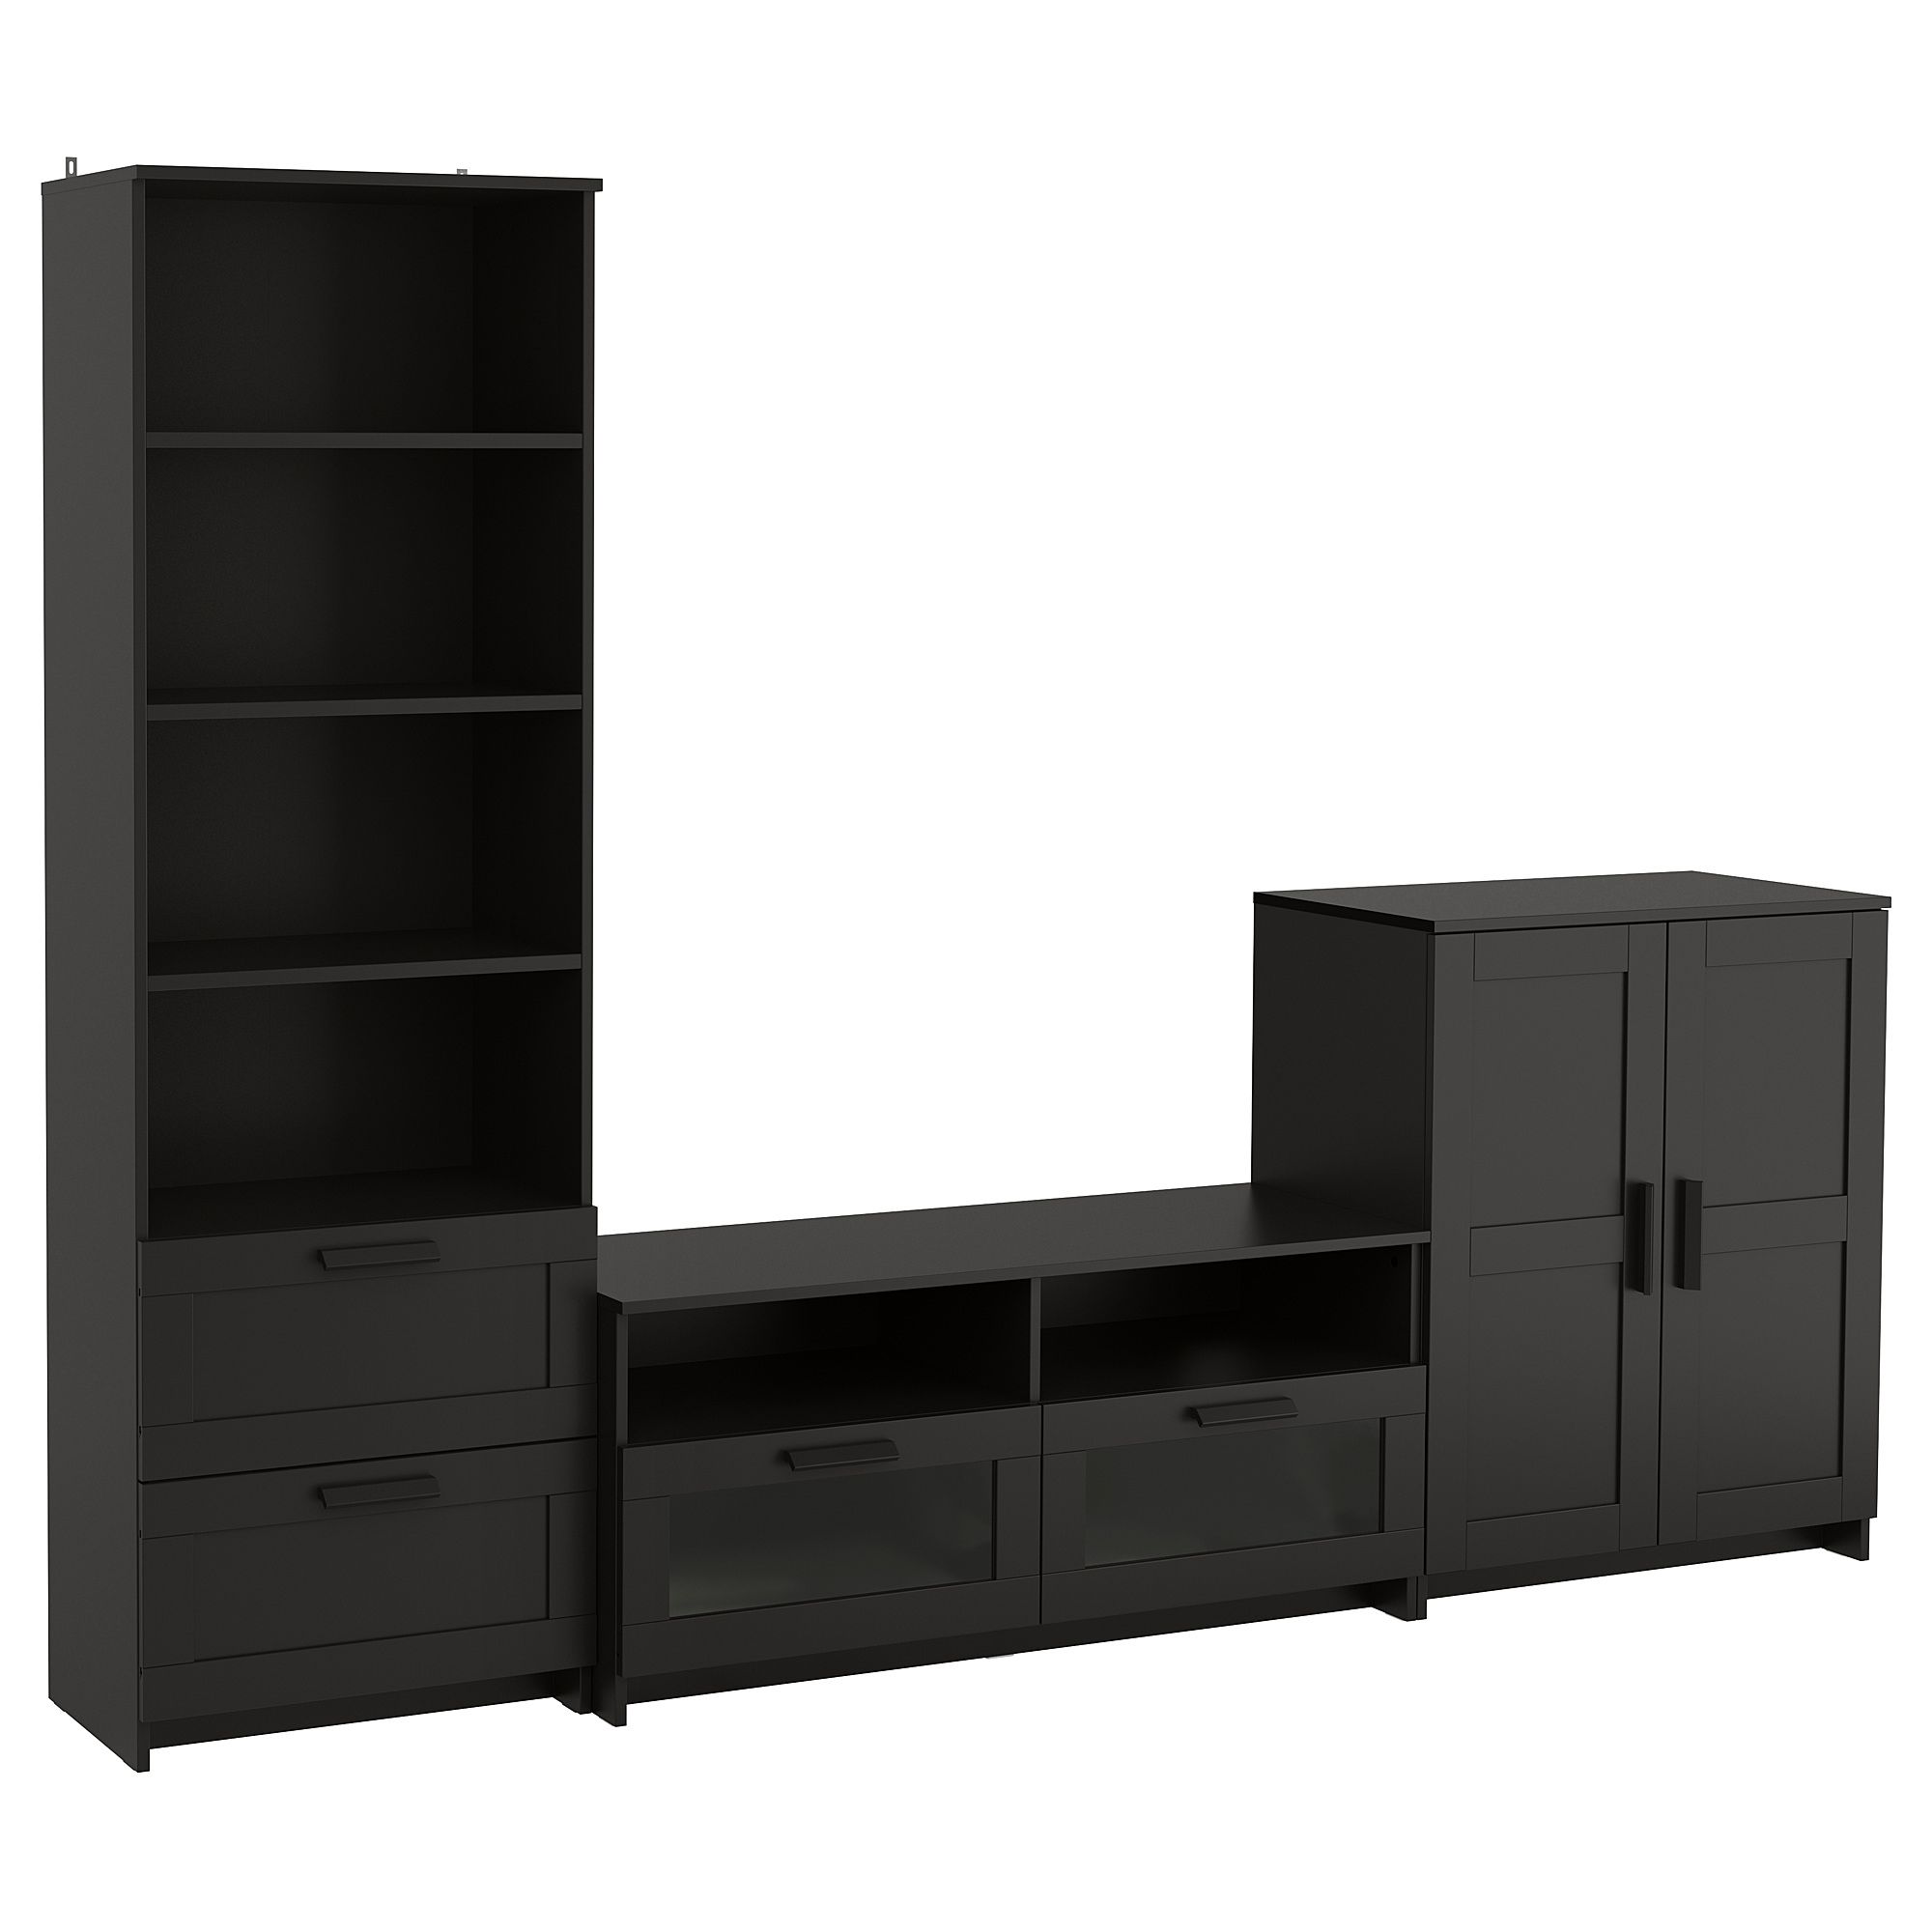 Furniture : Brimnes Tv Storage Combination Black Stand With With Trendy Bookshelves Drawer Combination (View 12 of 15)